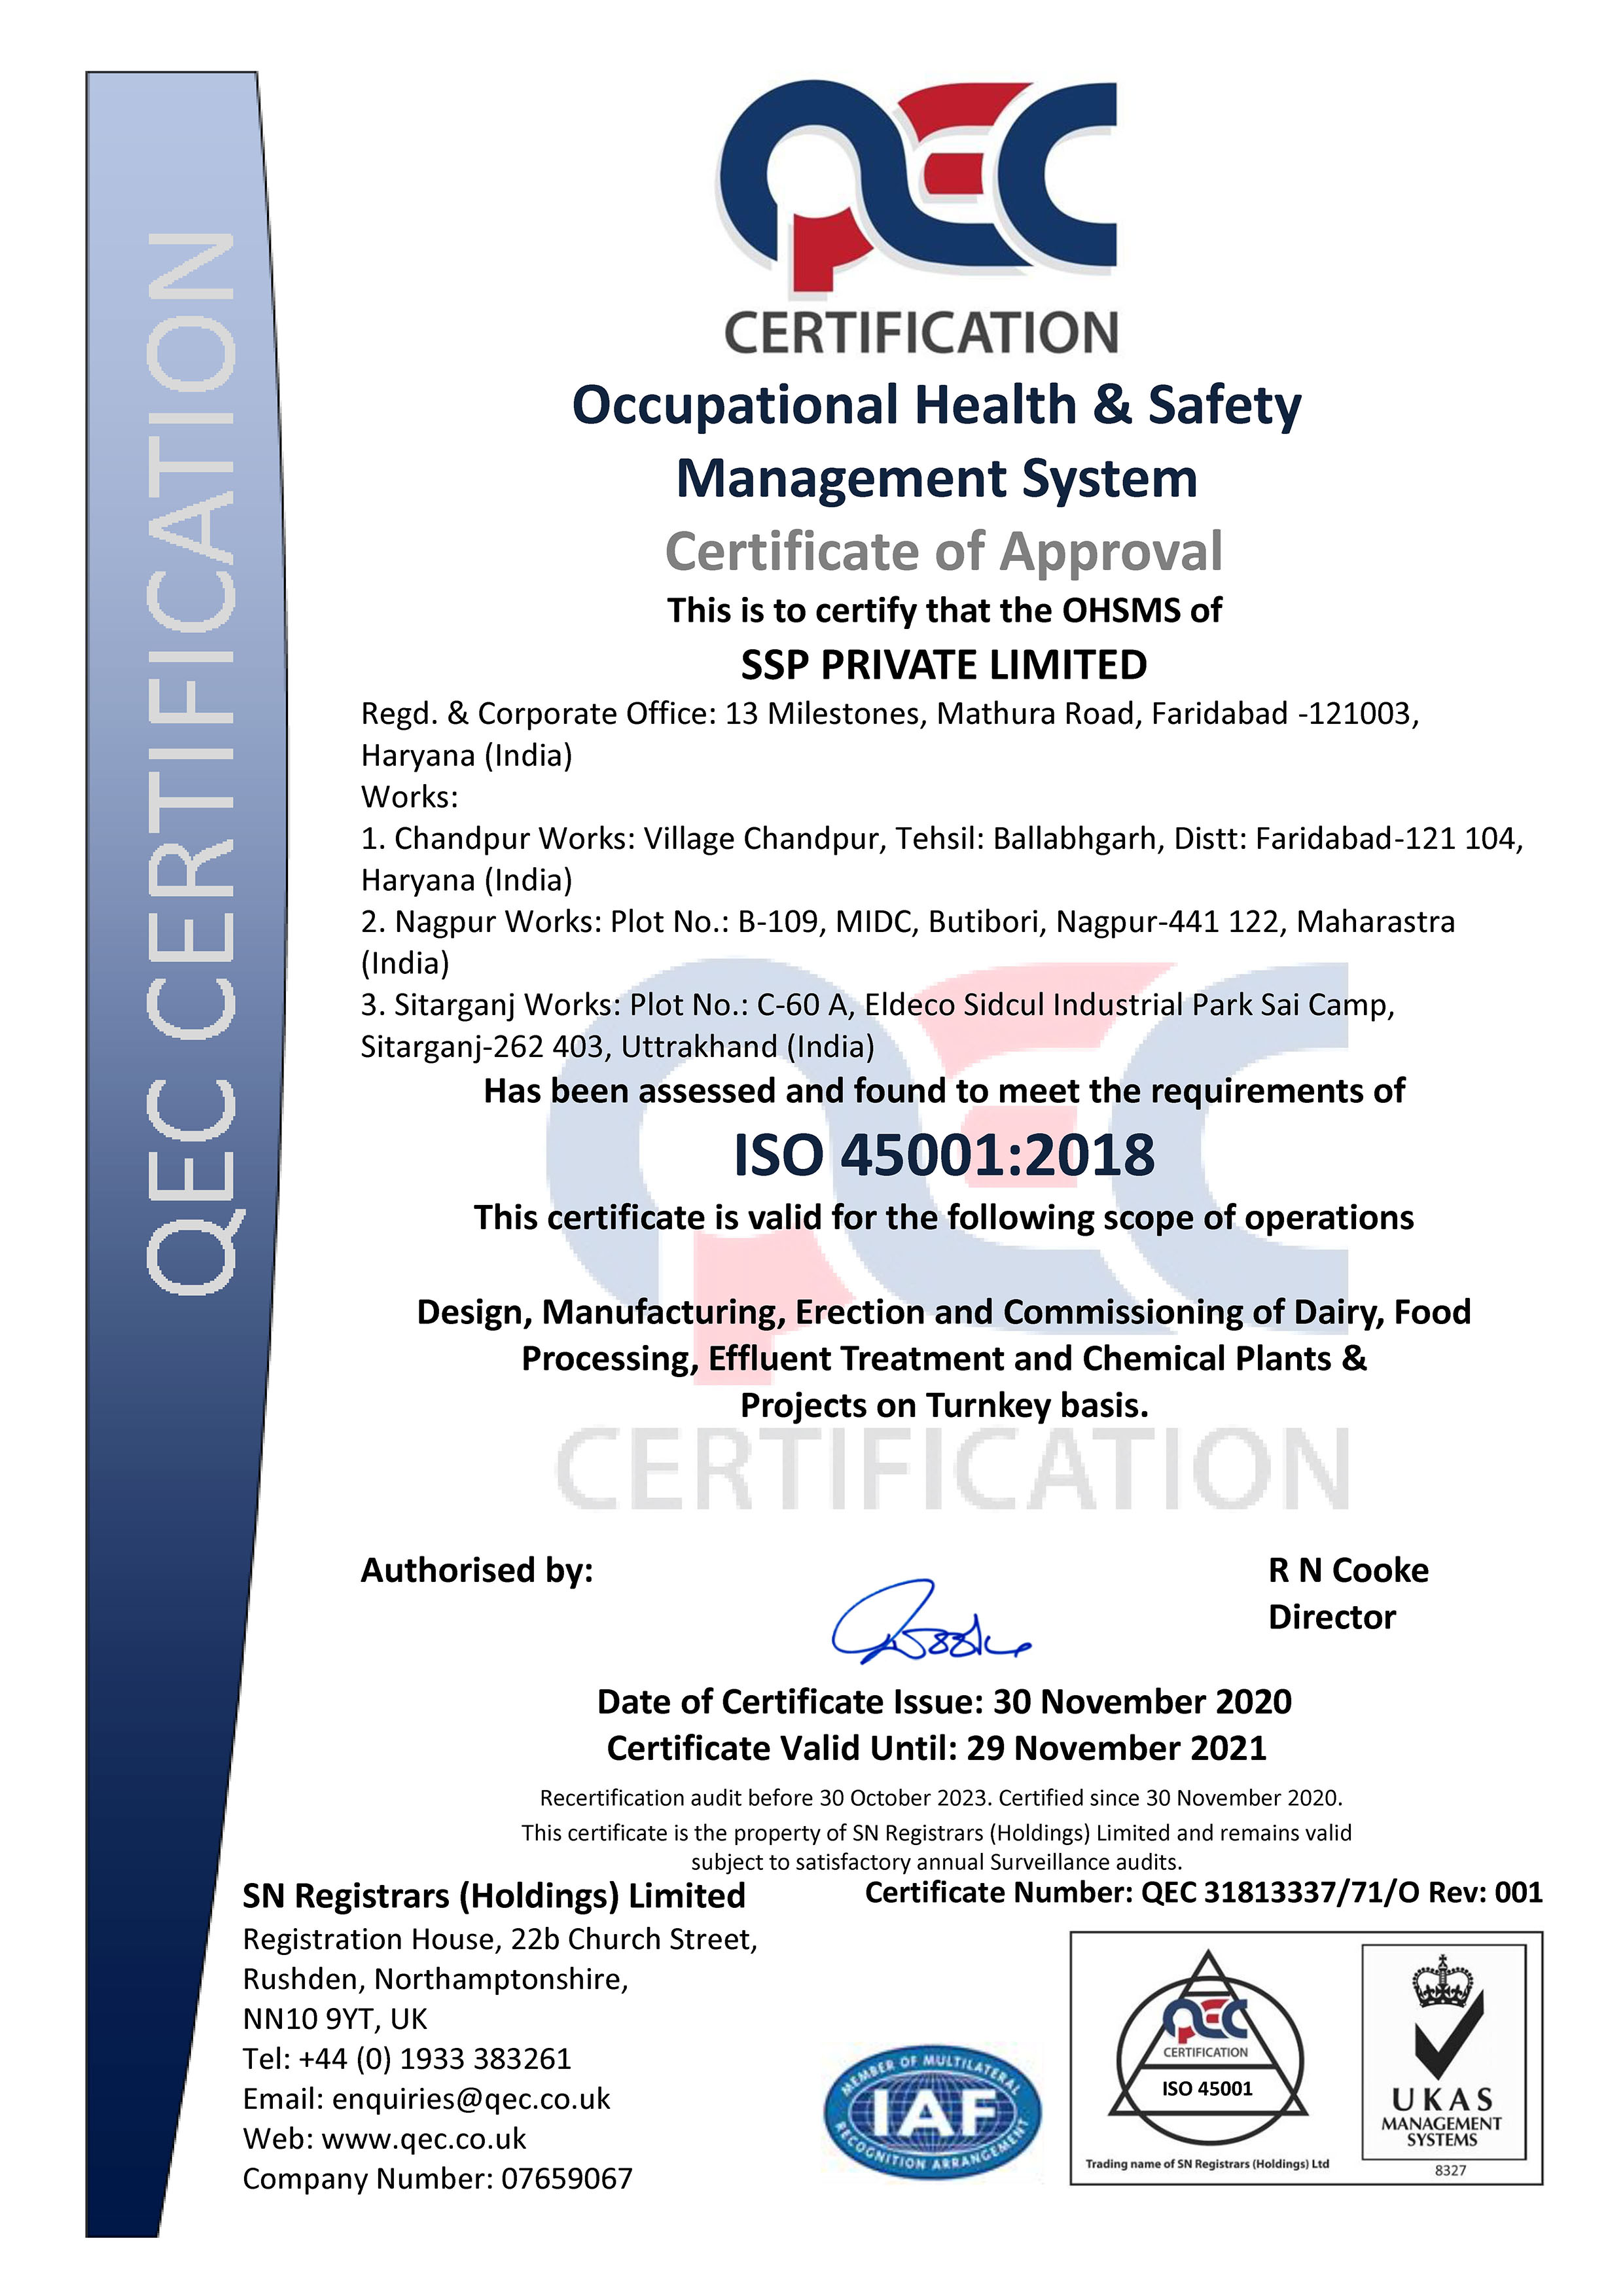 Occupational Health & Safety management system Certificate